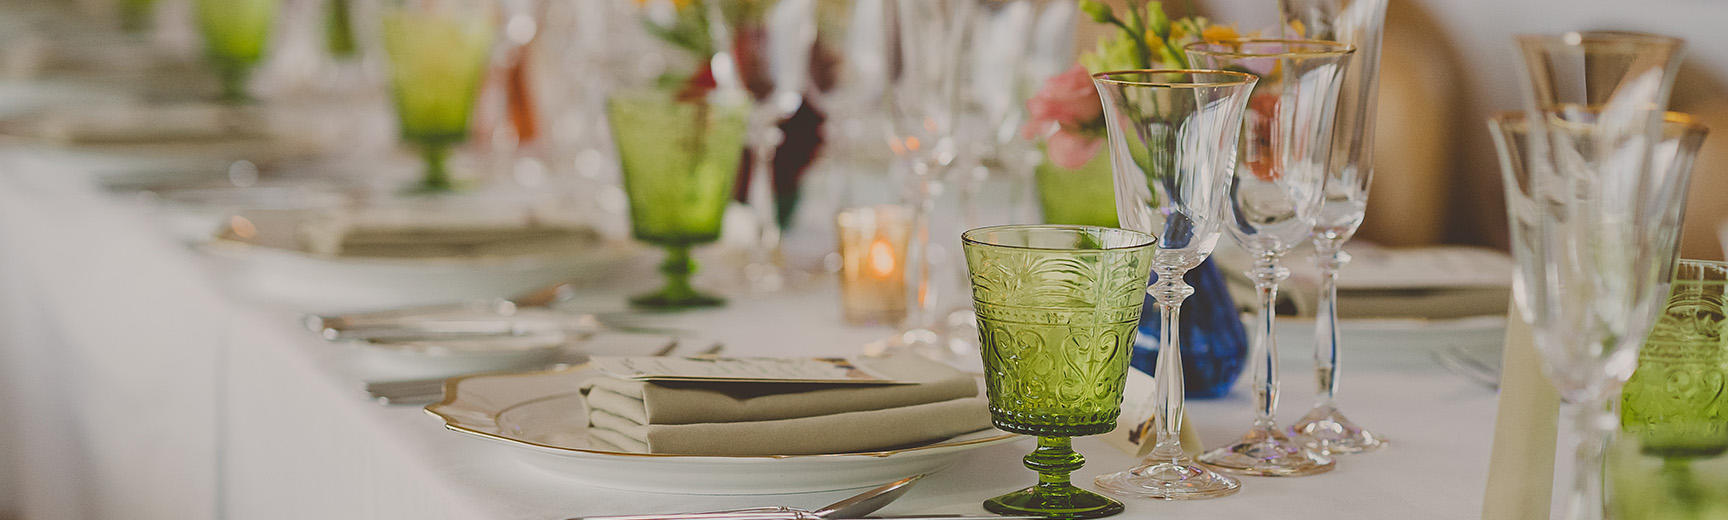 Image of a table laid for a wedding reception with green glasses, and spring flowers